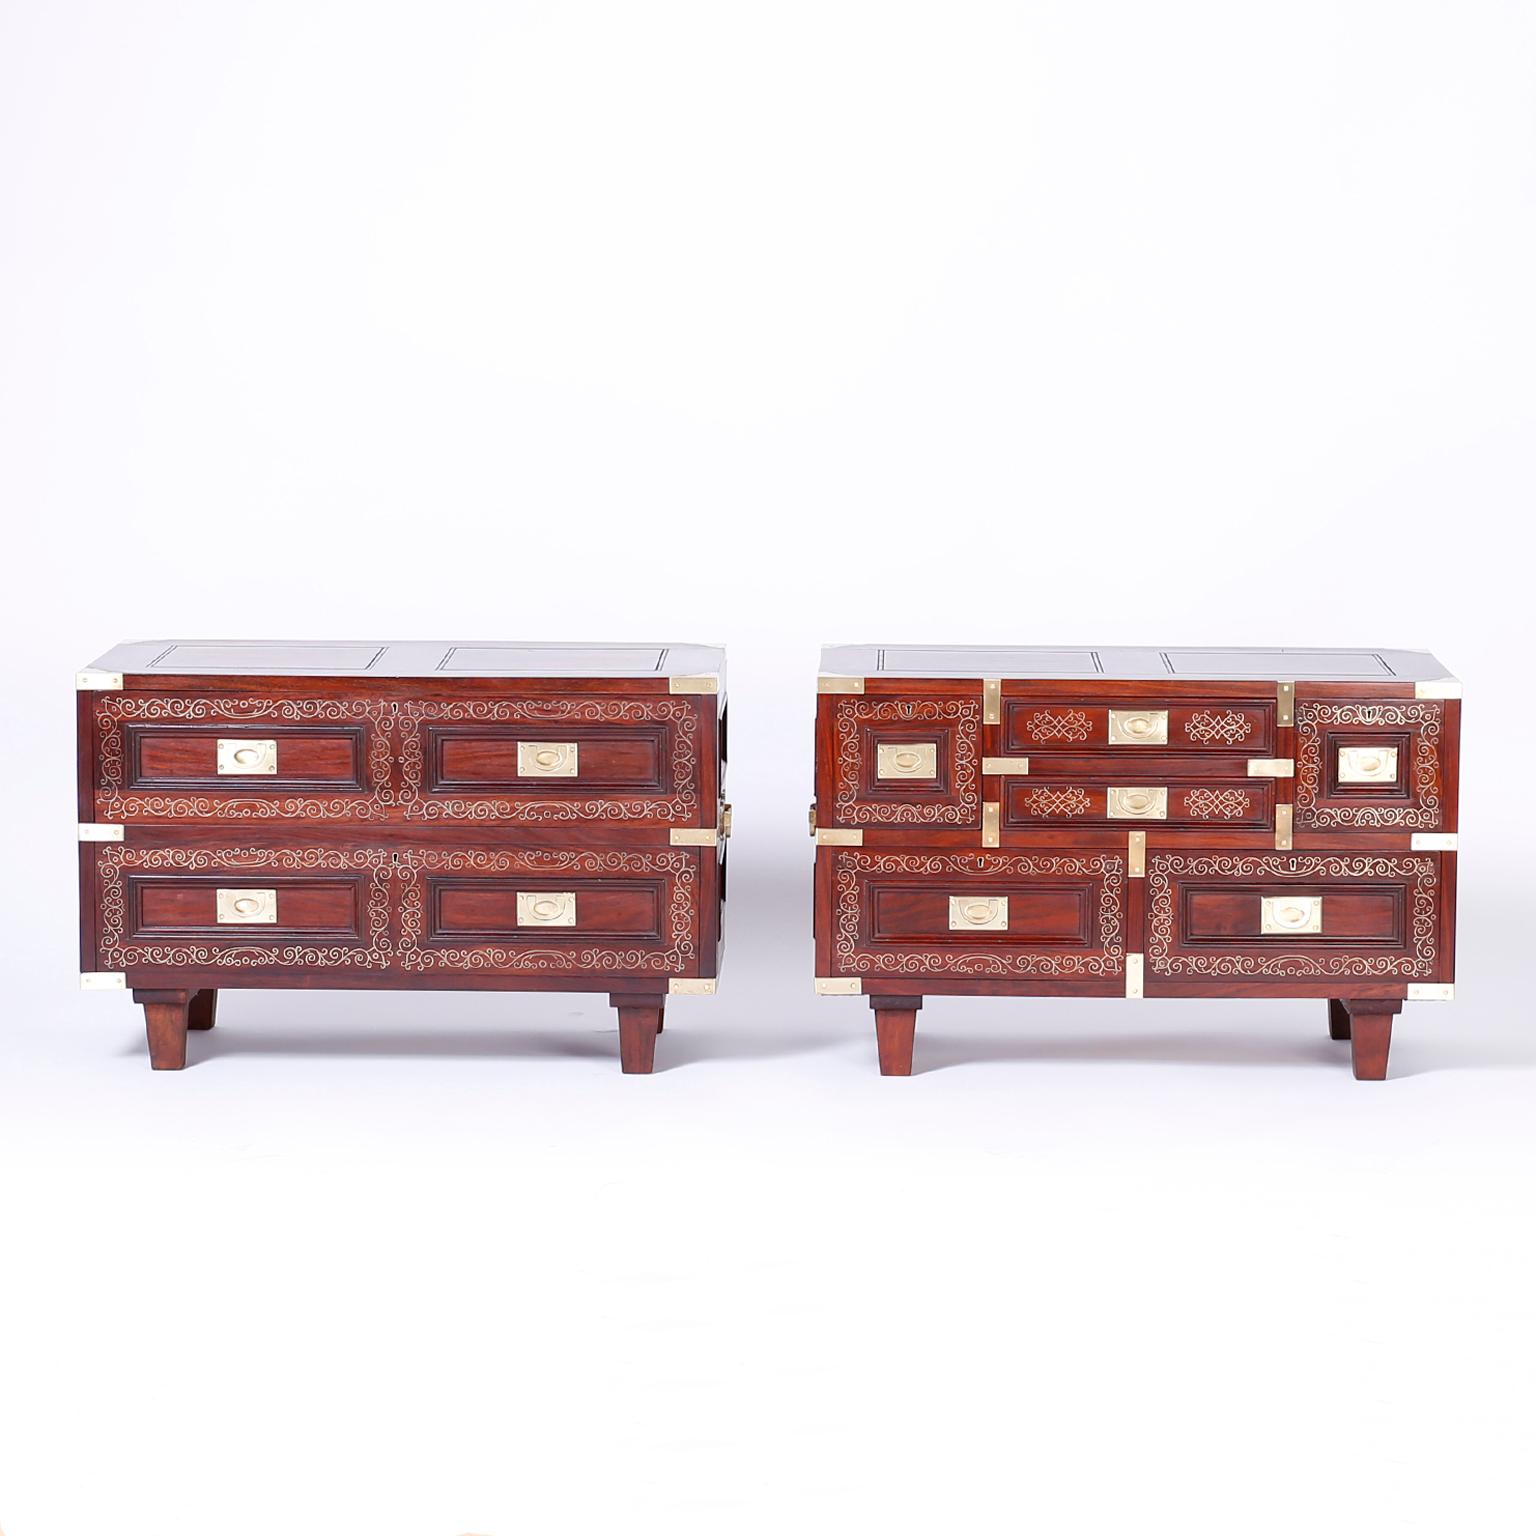 Anglo Indian pair of nightstands with the unusual duel option of stacking into a chest of drawers. Featuring rosewood construction, inlaid brass floral designs, panels sides, and tapered legs.

Measures: Nightstands H 19, W 30, D 15
Chest H 34, W